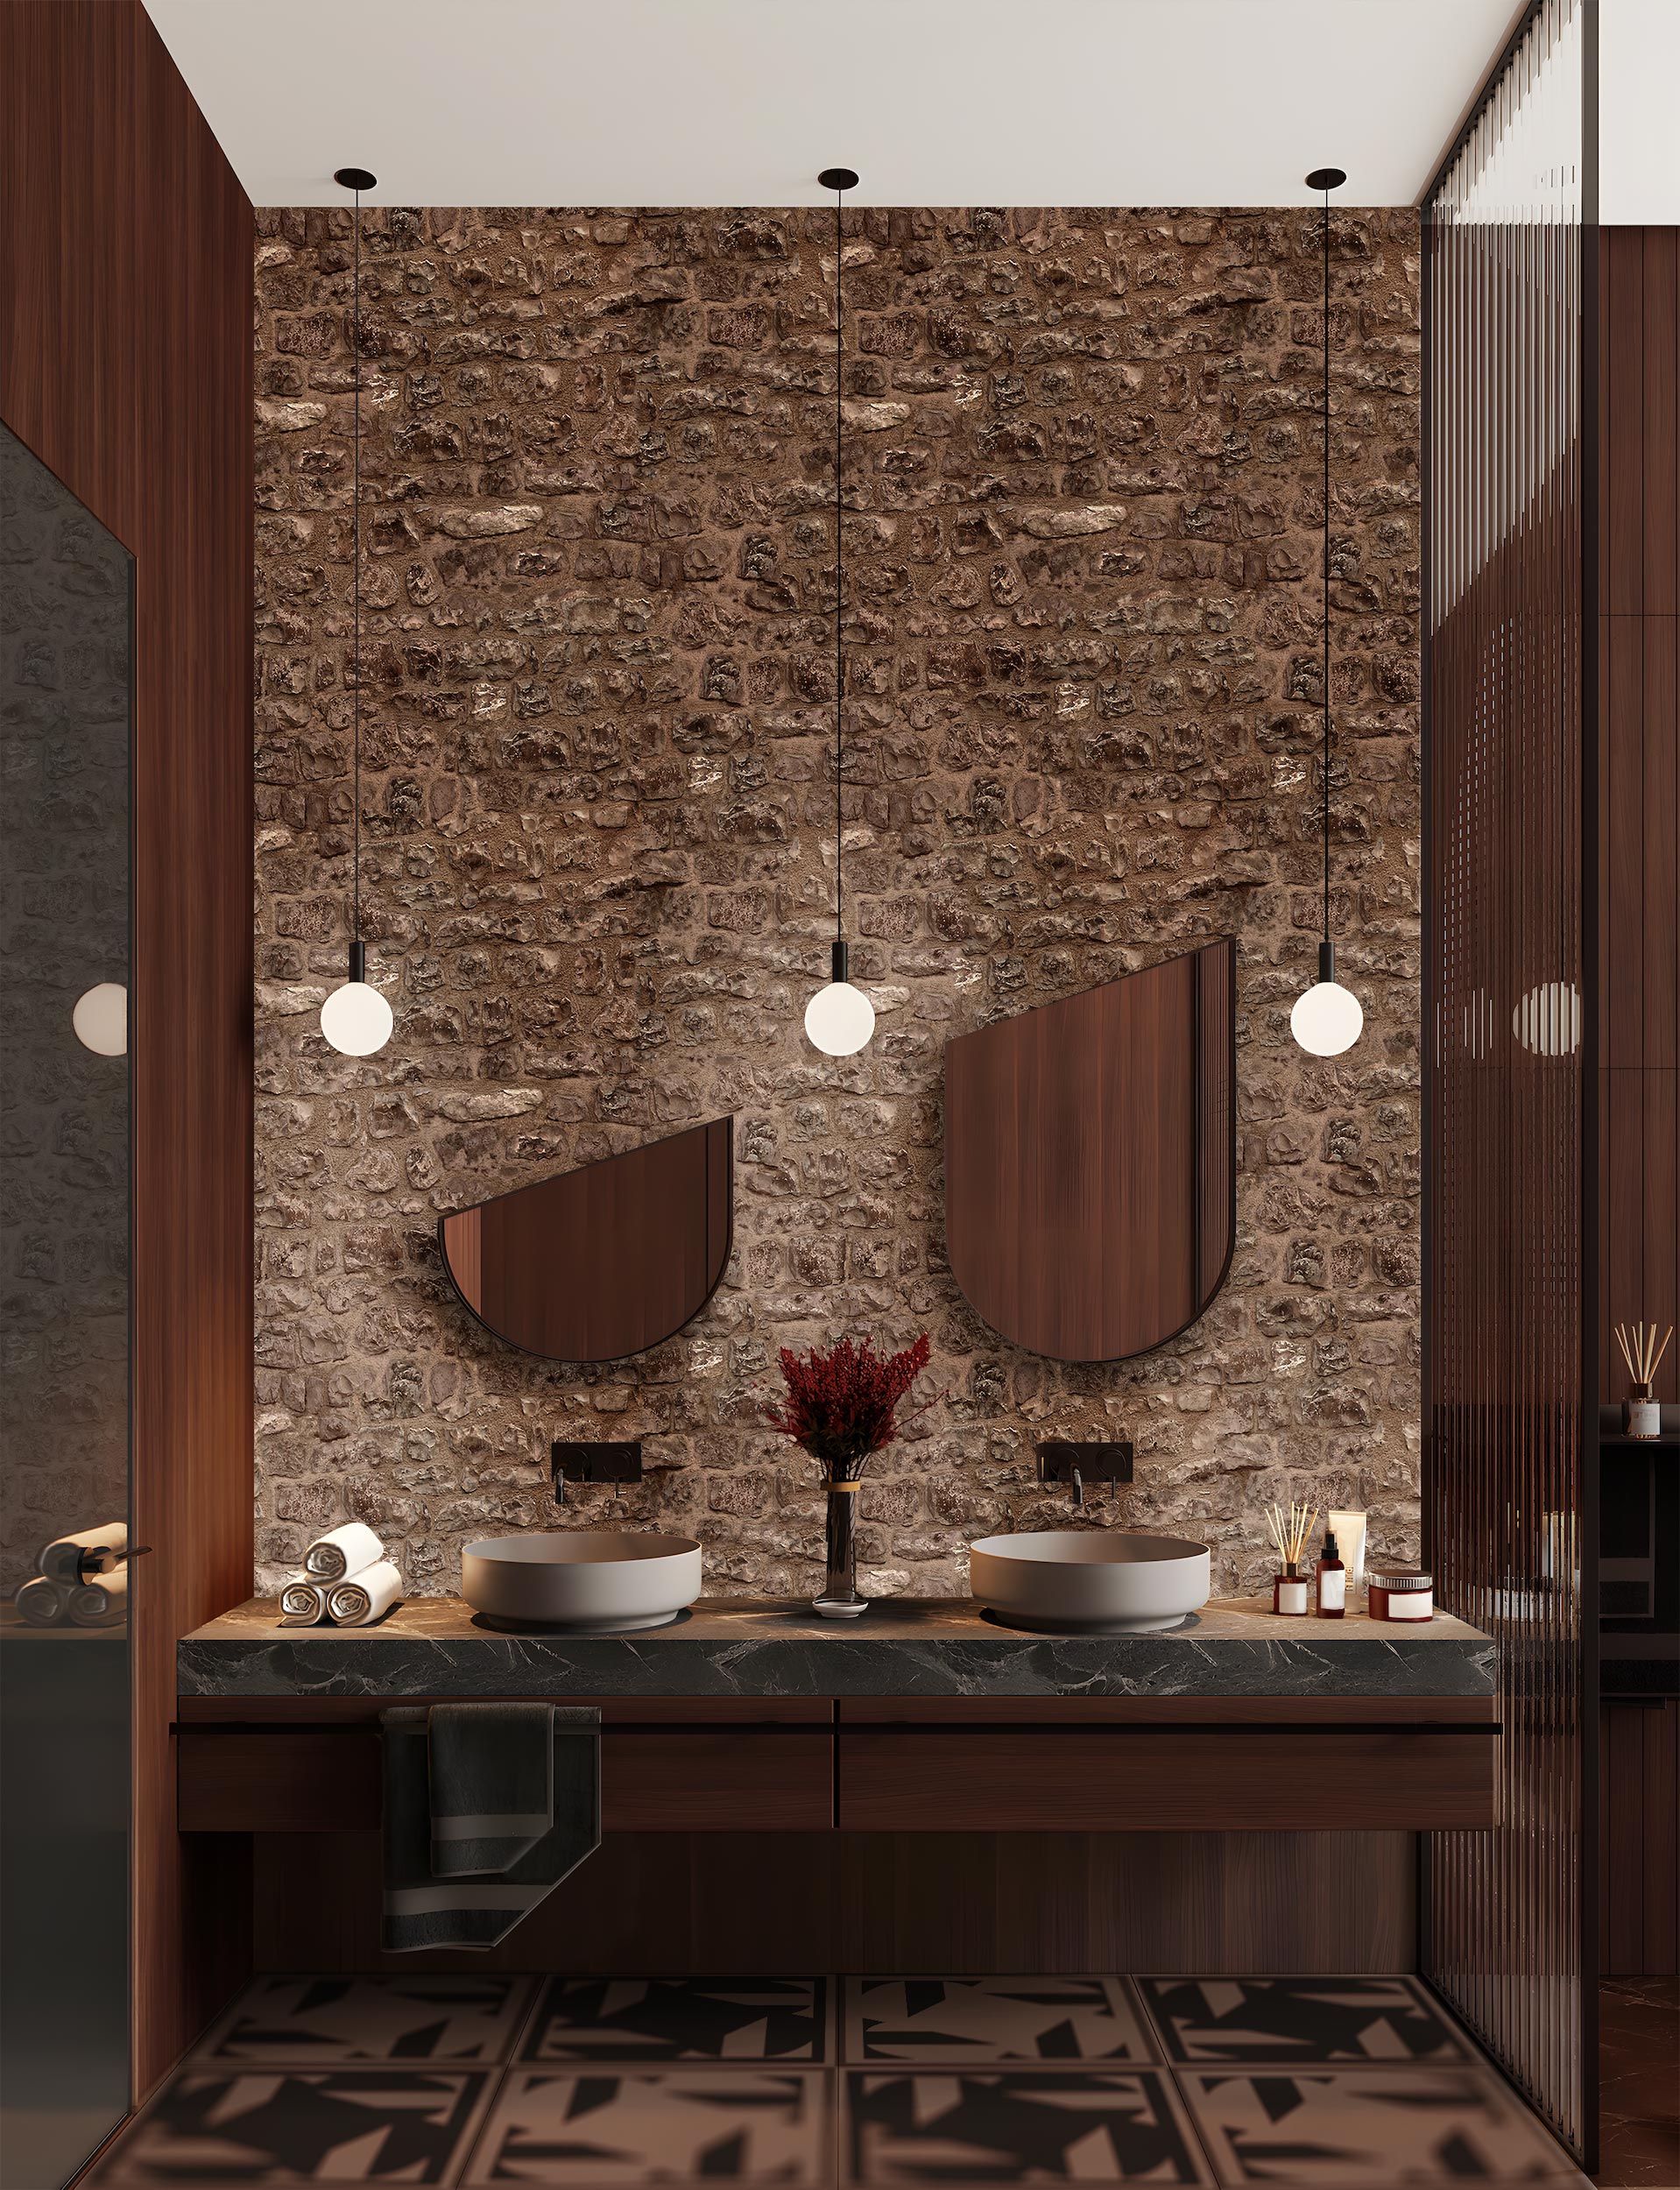 Image of a modern restaurant bathroom, with wall hangings sliced at an angle